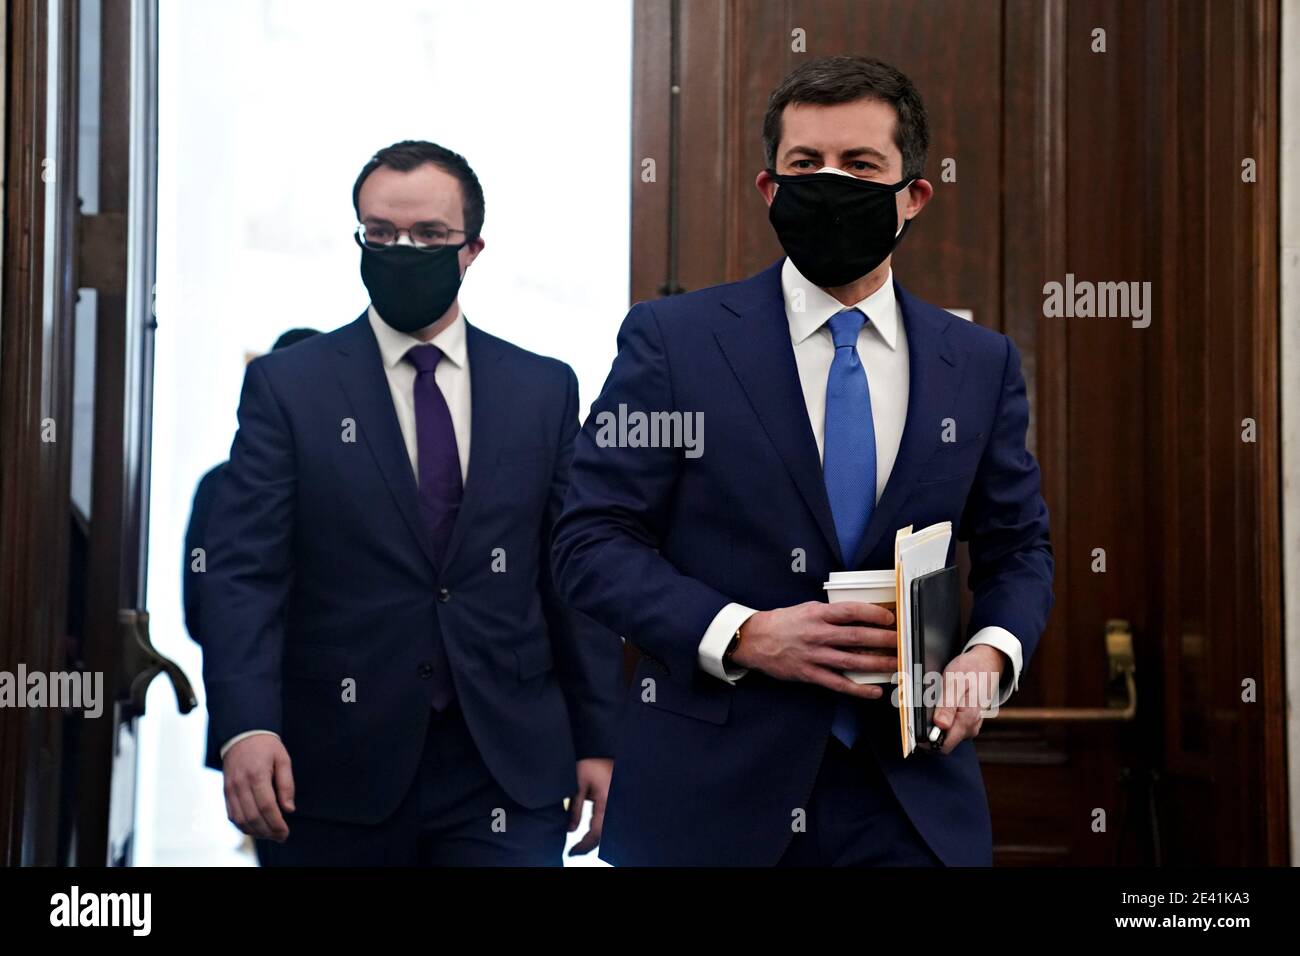 Pete Buttigieg, U.S. secretary of transportation nominee for U.S. President Joe Biden, right, wears a protective mask while arriving to a Senate Commerce, Science and Transportation Committee confirmation hearing in Washington, DC, U.S., on Thursday, Jan. 21, 2021. Buttigieg, is pledging to carry out the administration's ambitious agenda to rebuild the nation's infrastructure, calling it a 'generational opportunity' to create new jobs, fight economic inequality and stem climate change. Credit: Stefani Reynolds/Pool via CNP | usage worldwide Stock Photo